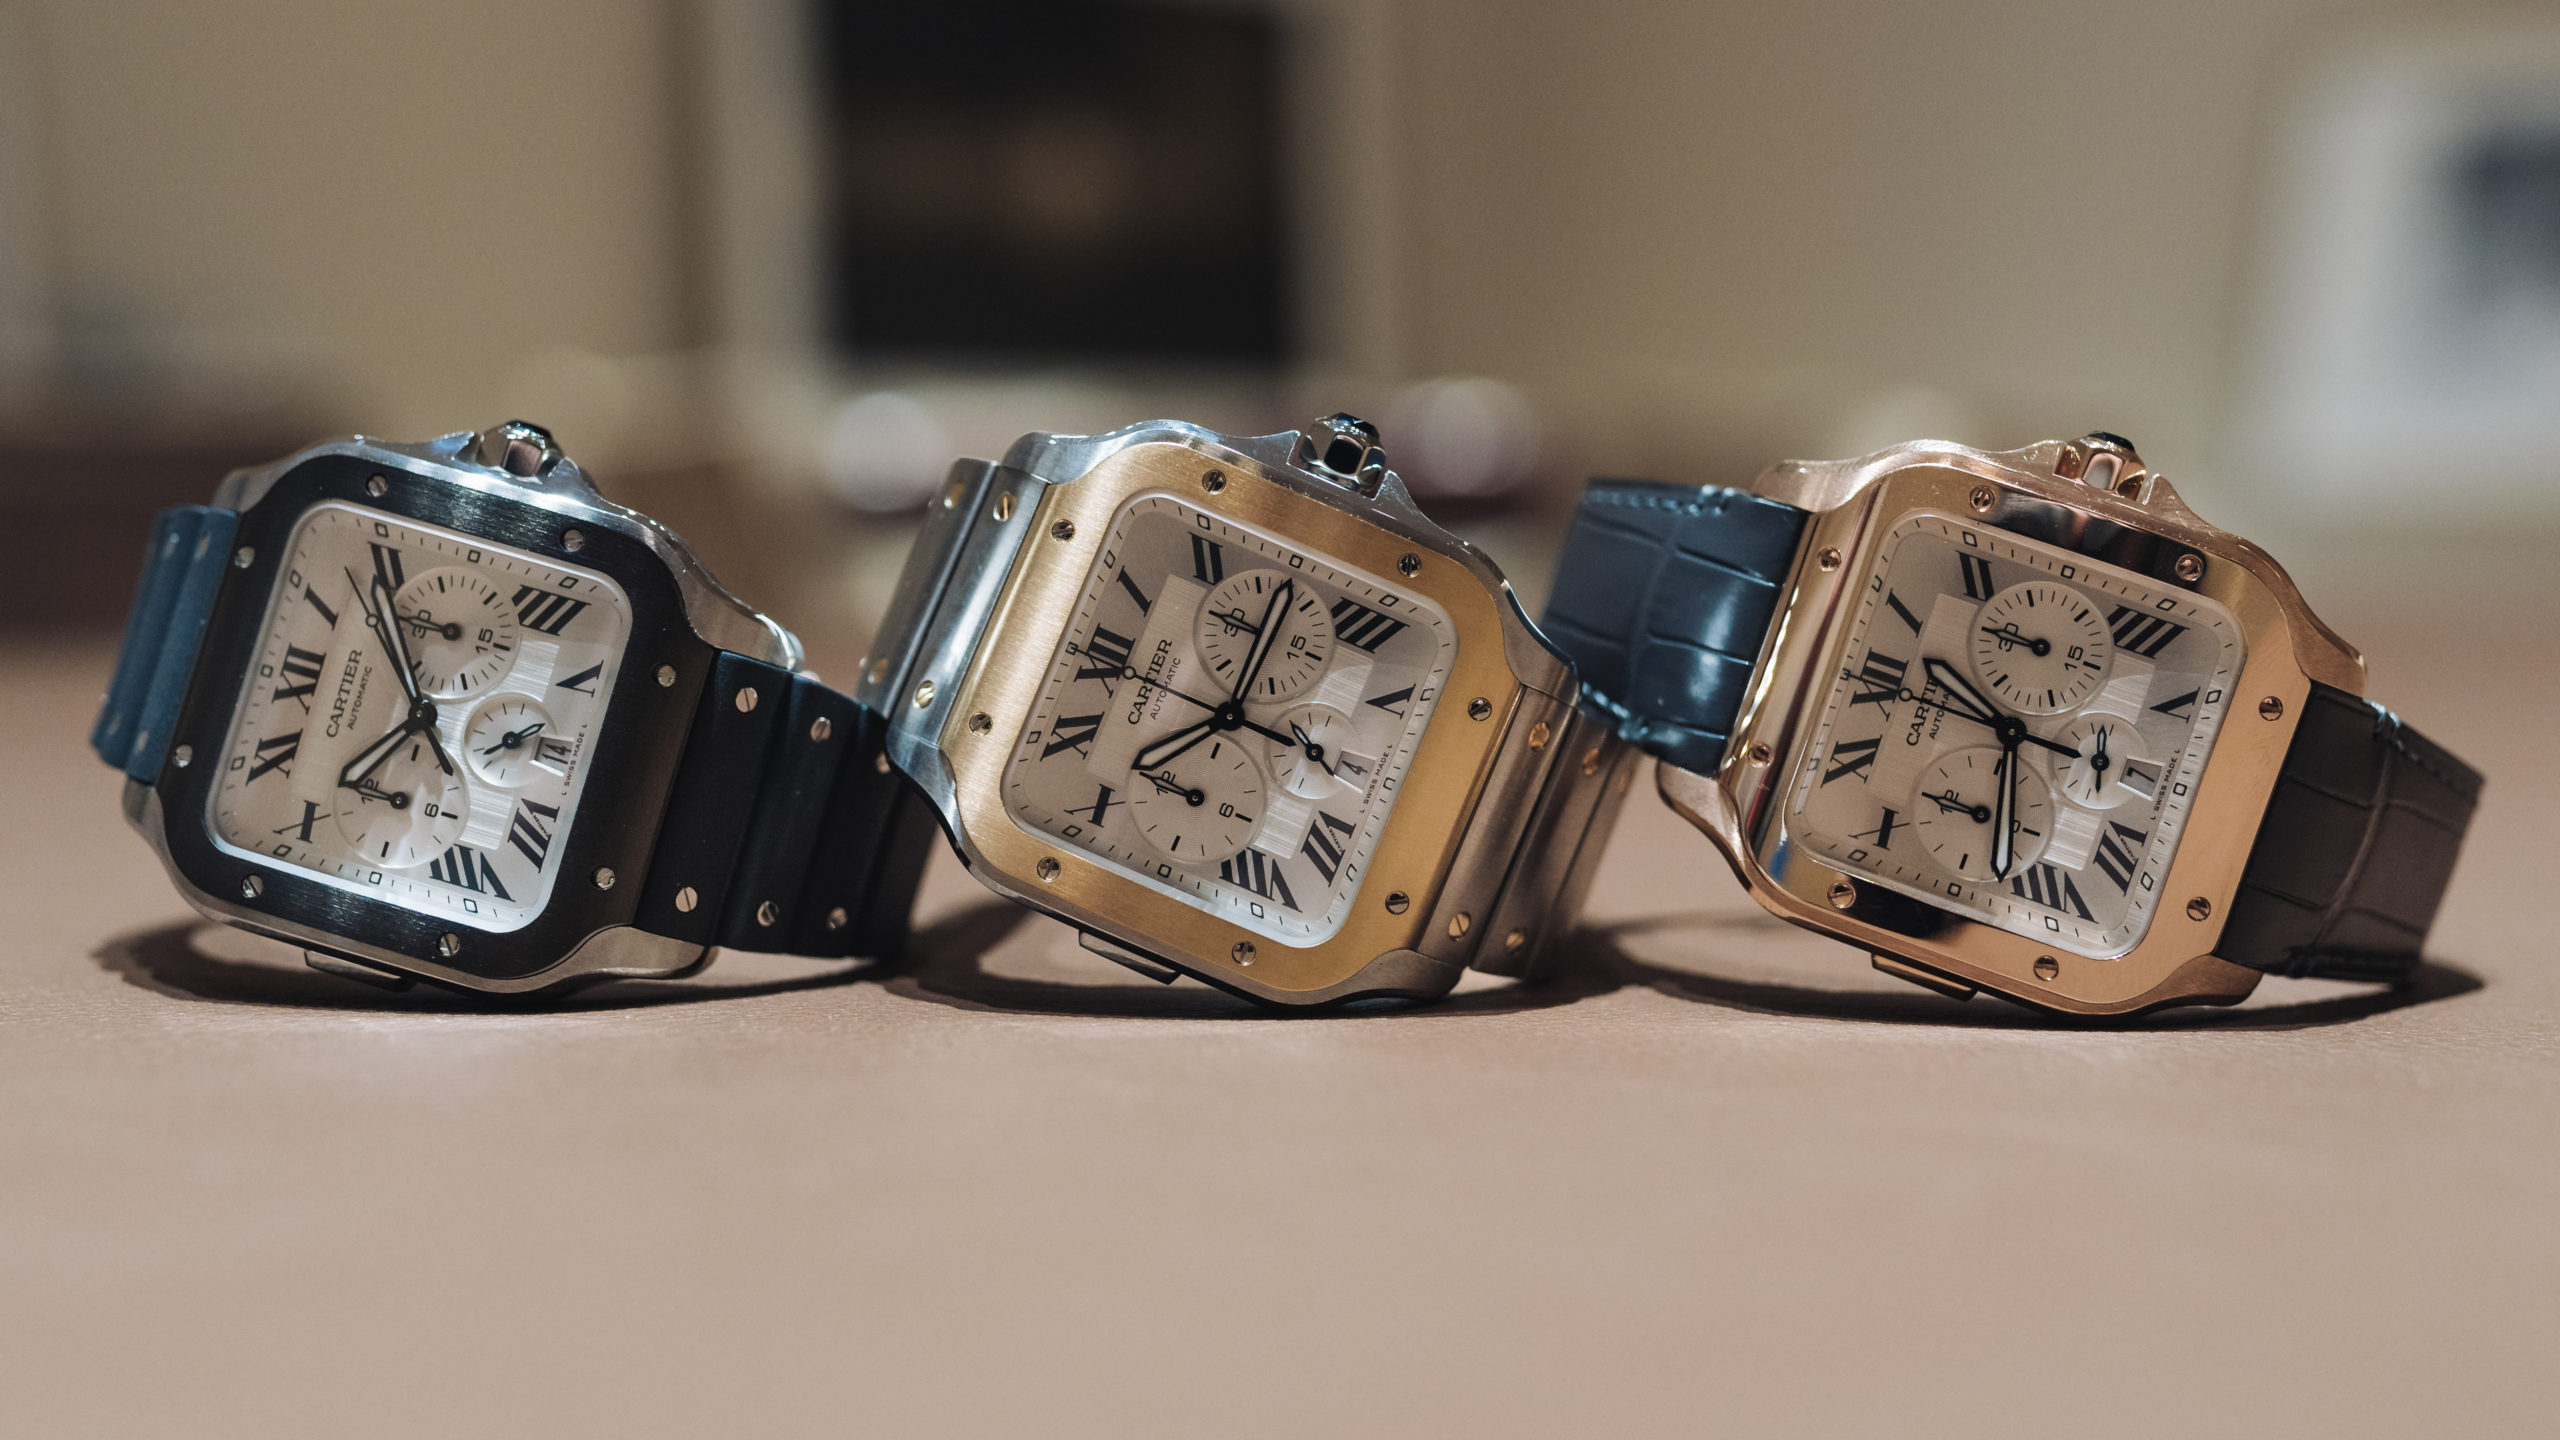 cartier watch new collection